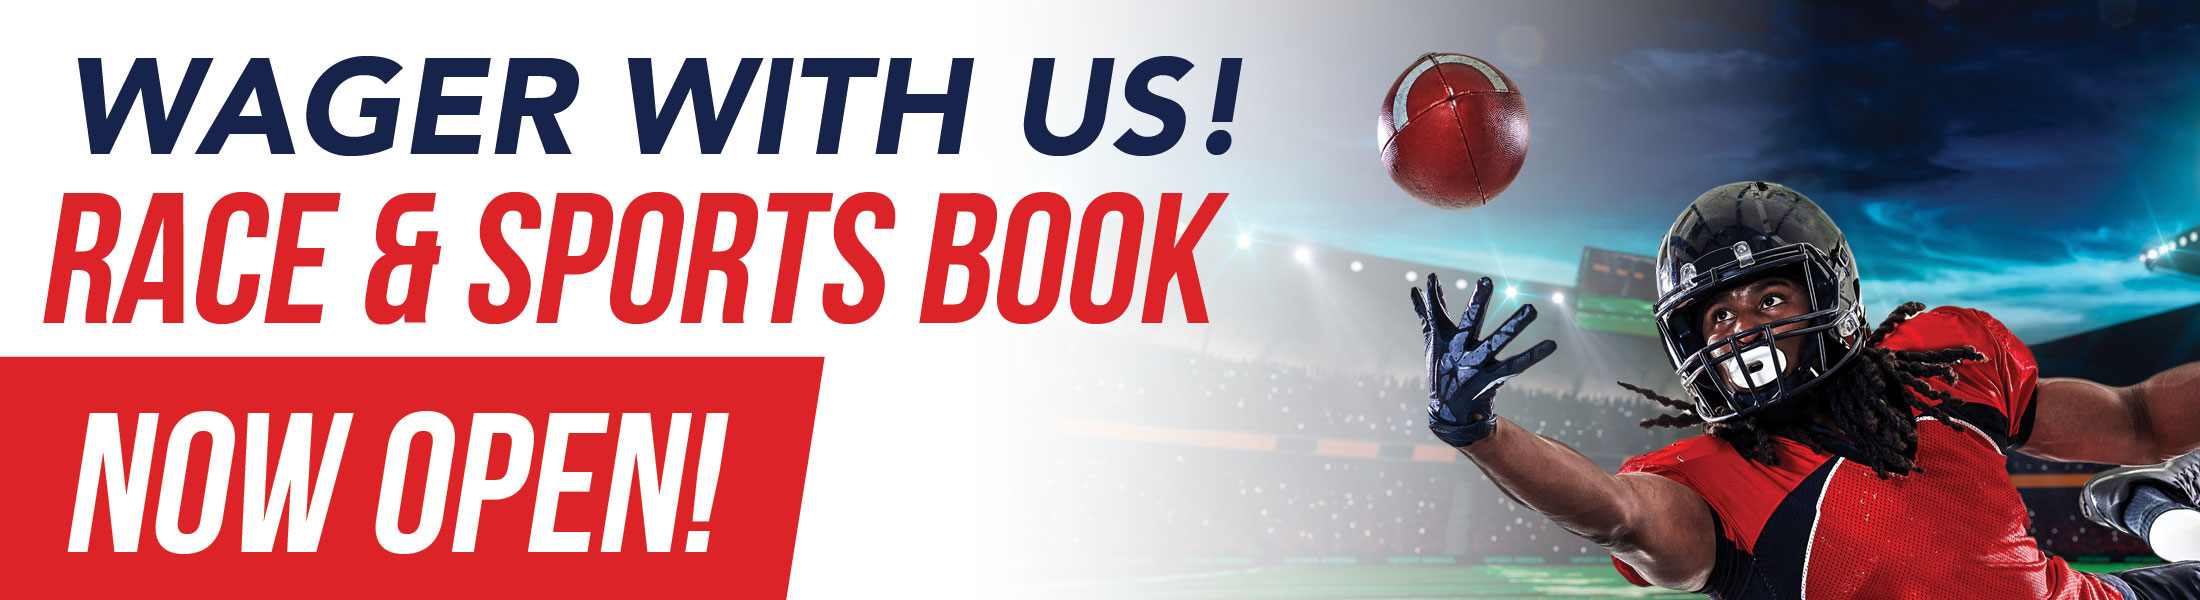 Race & Sports Book Now Open